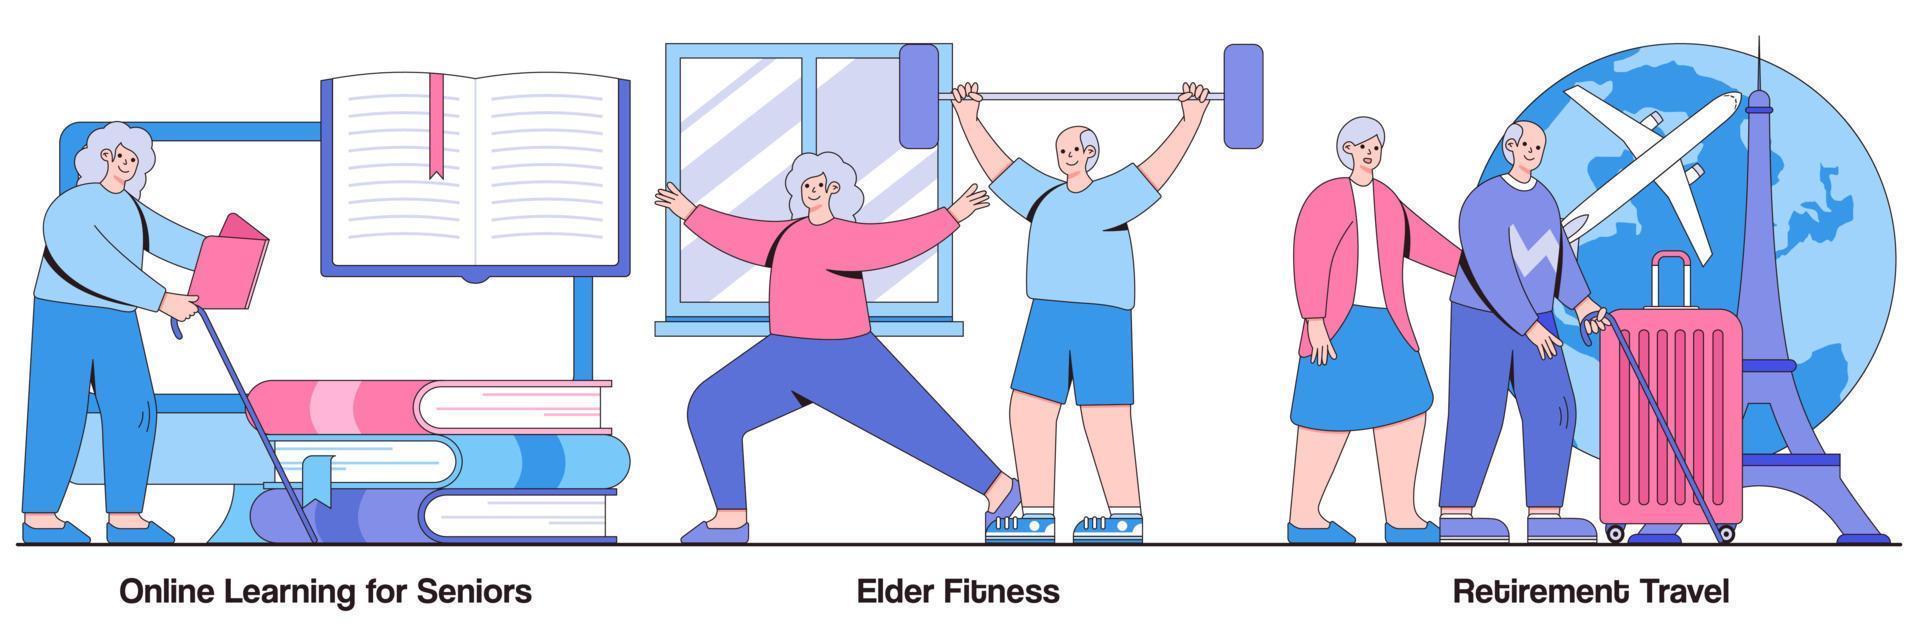 Online Learning for Seniors, Elder Fitness, Retirement Travel with People Characters Illustrations Pack vector